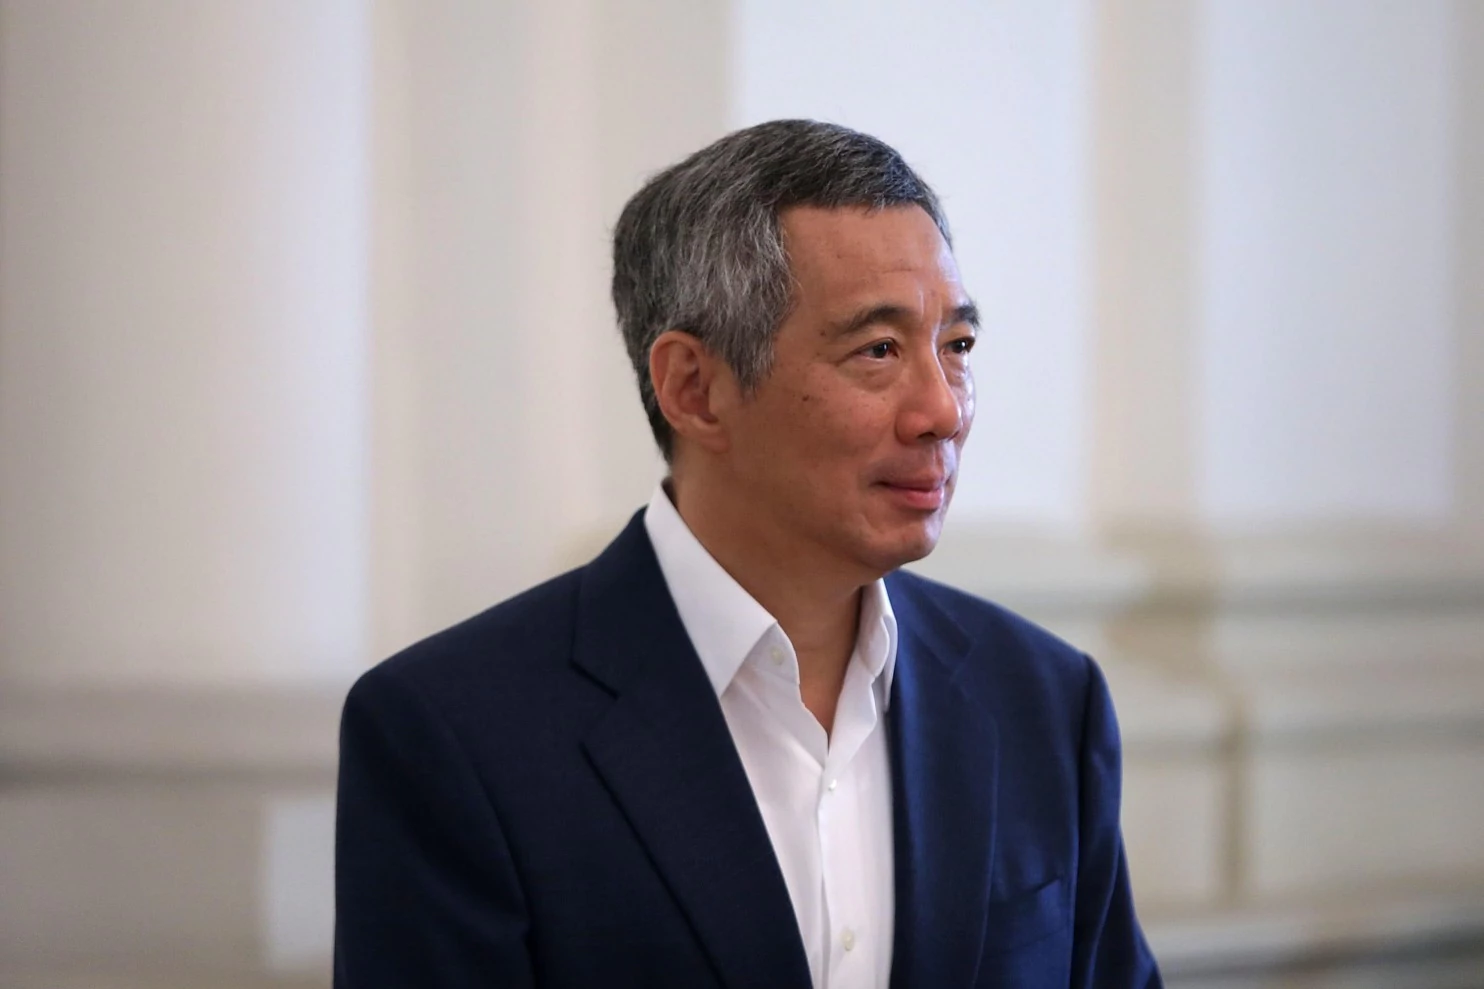 Lee Hsien Loong An interview with Singapore Prime Minister Lee Hsien Loong